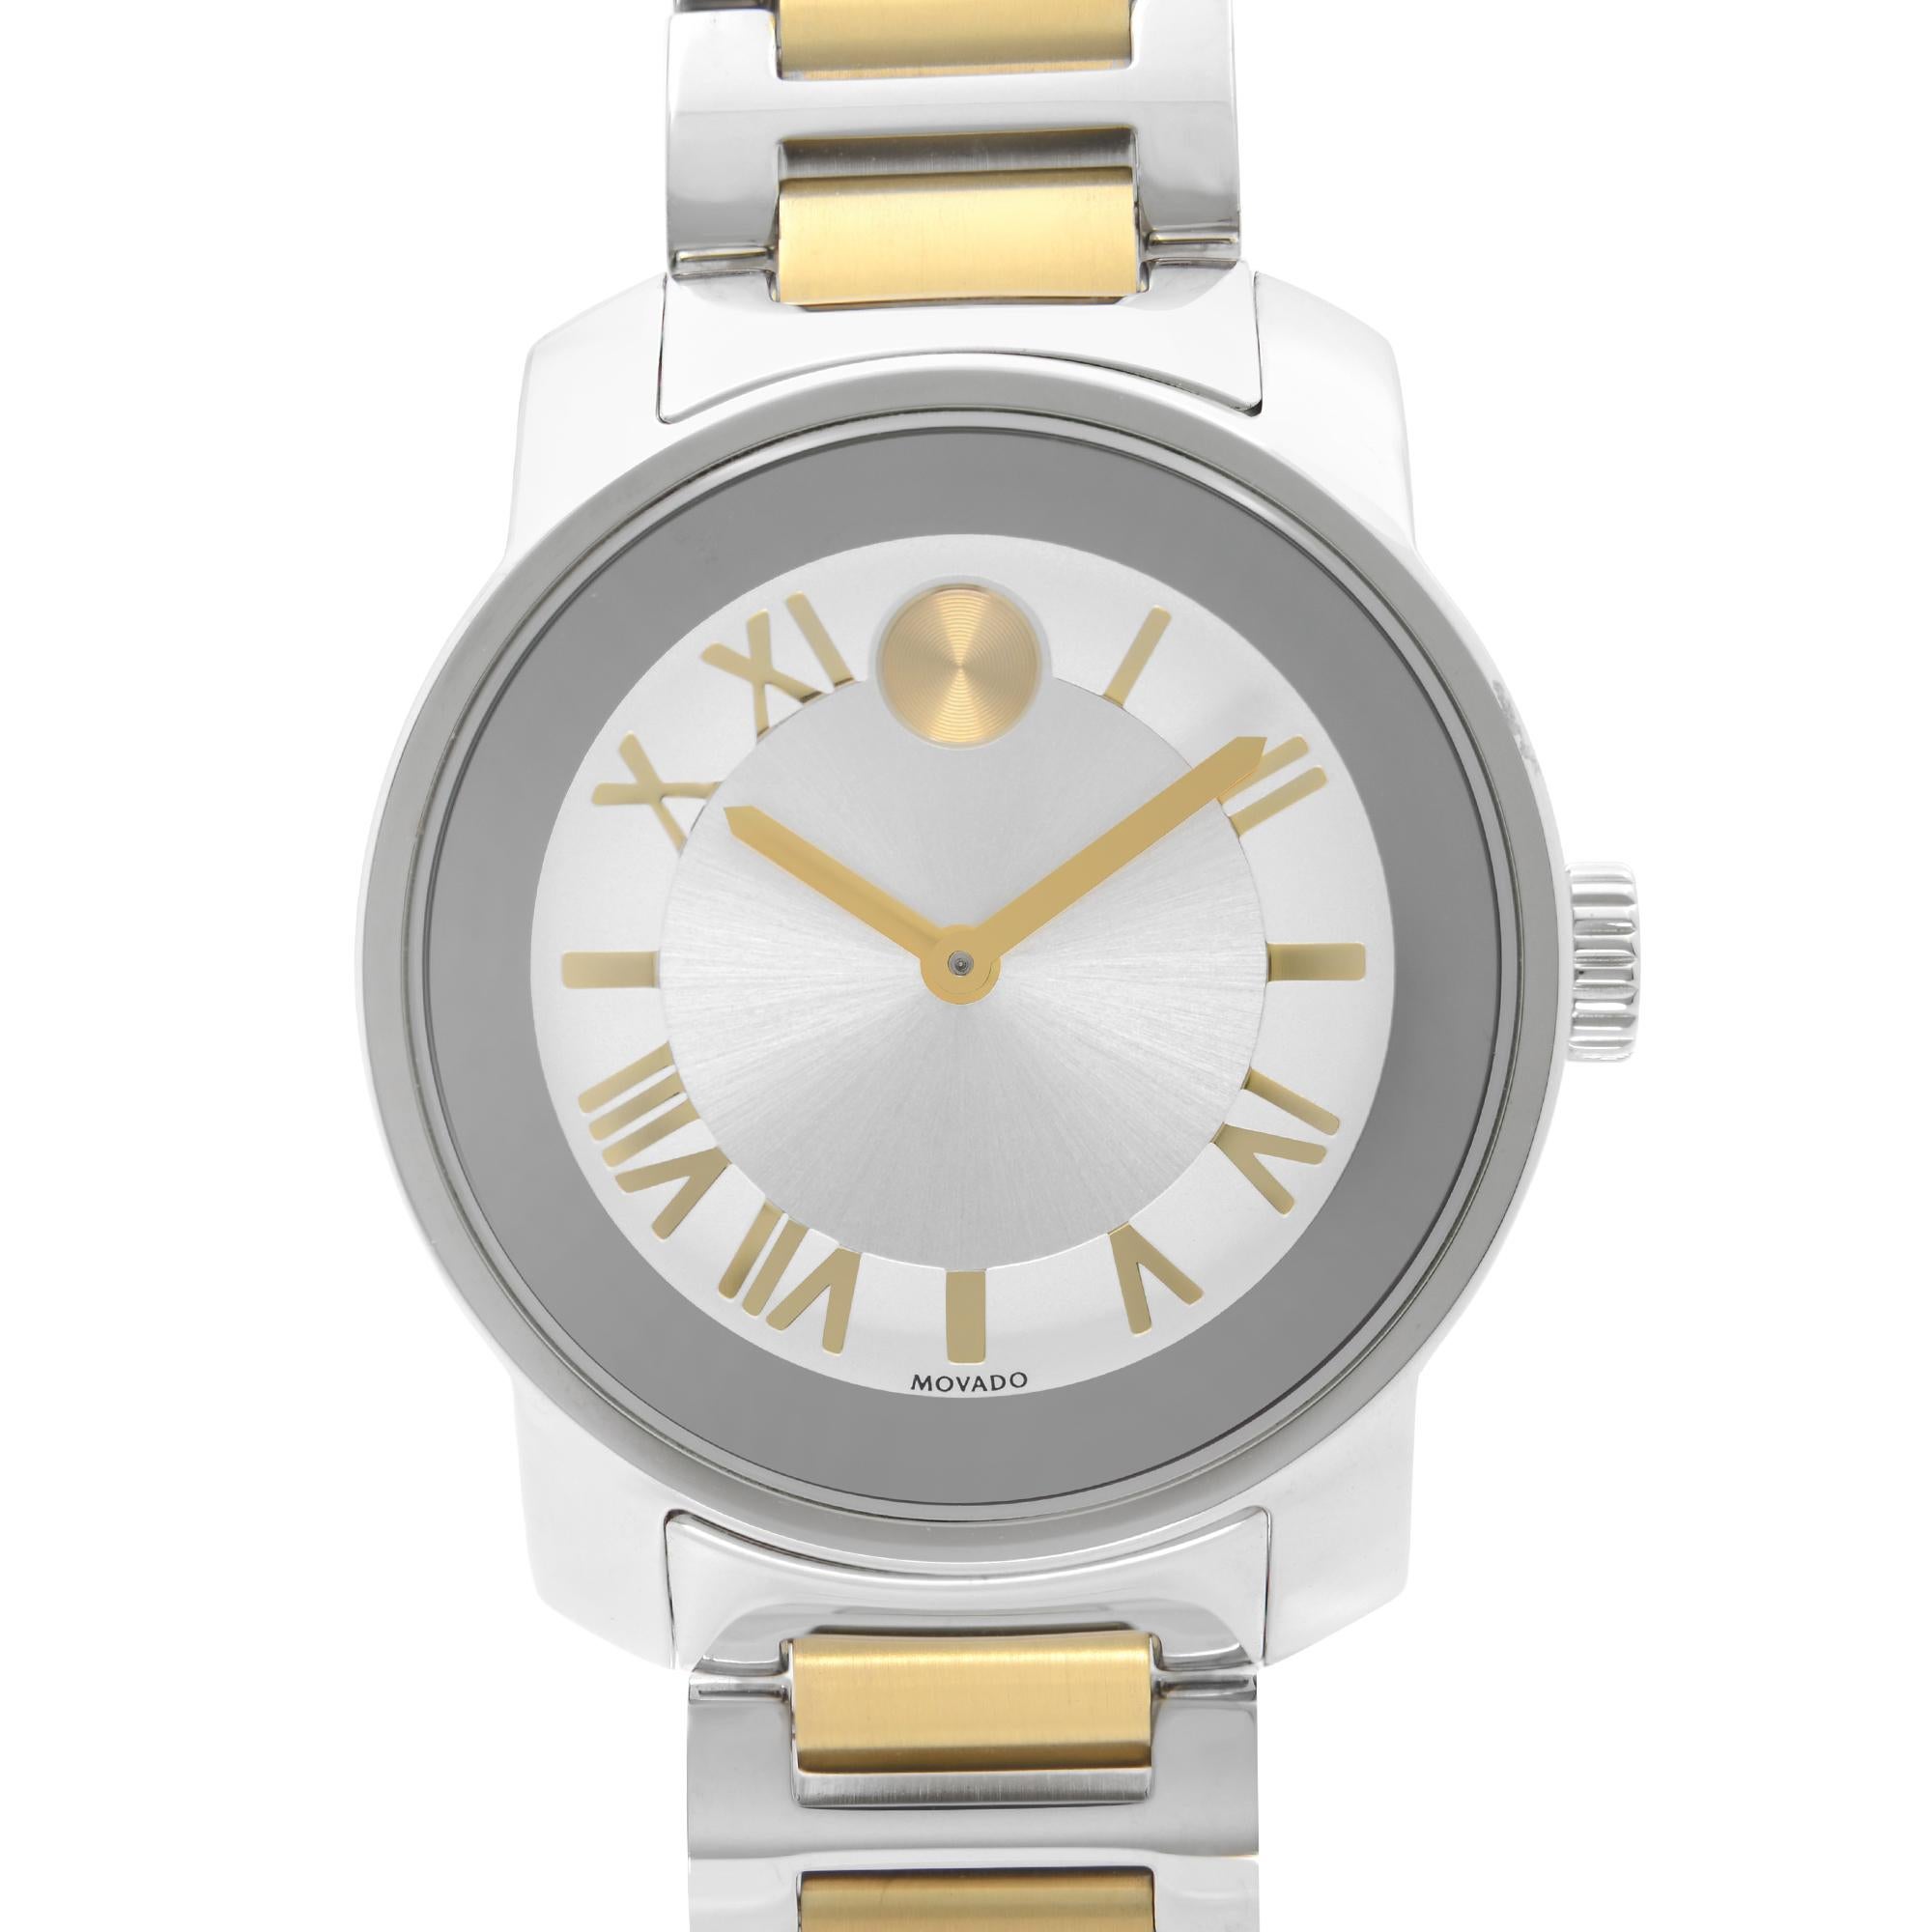 Unworn Movado Bold Ladies Watch 3600245. This Beautiful Timepiece Features: Stainless Steel Case with a Two-Tone (Silver and Gold-tone) Stainless Steel Bracelet. Silver Dial with Gold-Tone Hands and Roman Numeral Hour Markers. The Movado Dot Marks